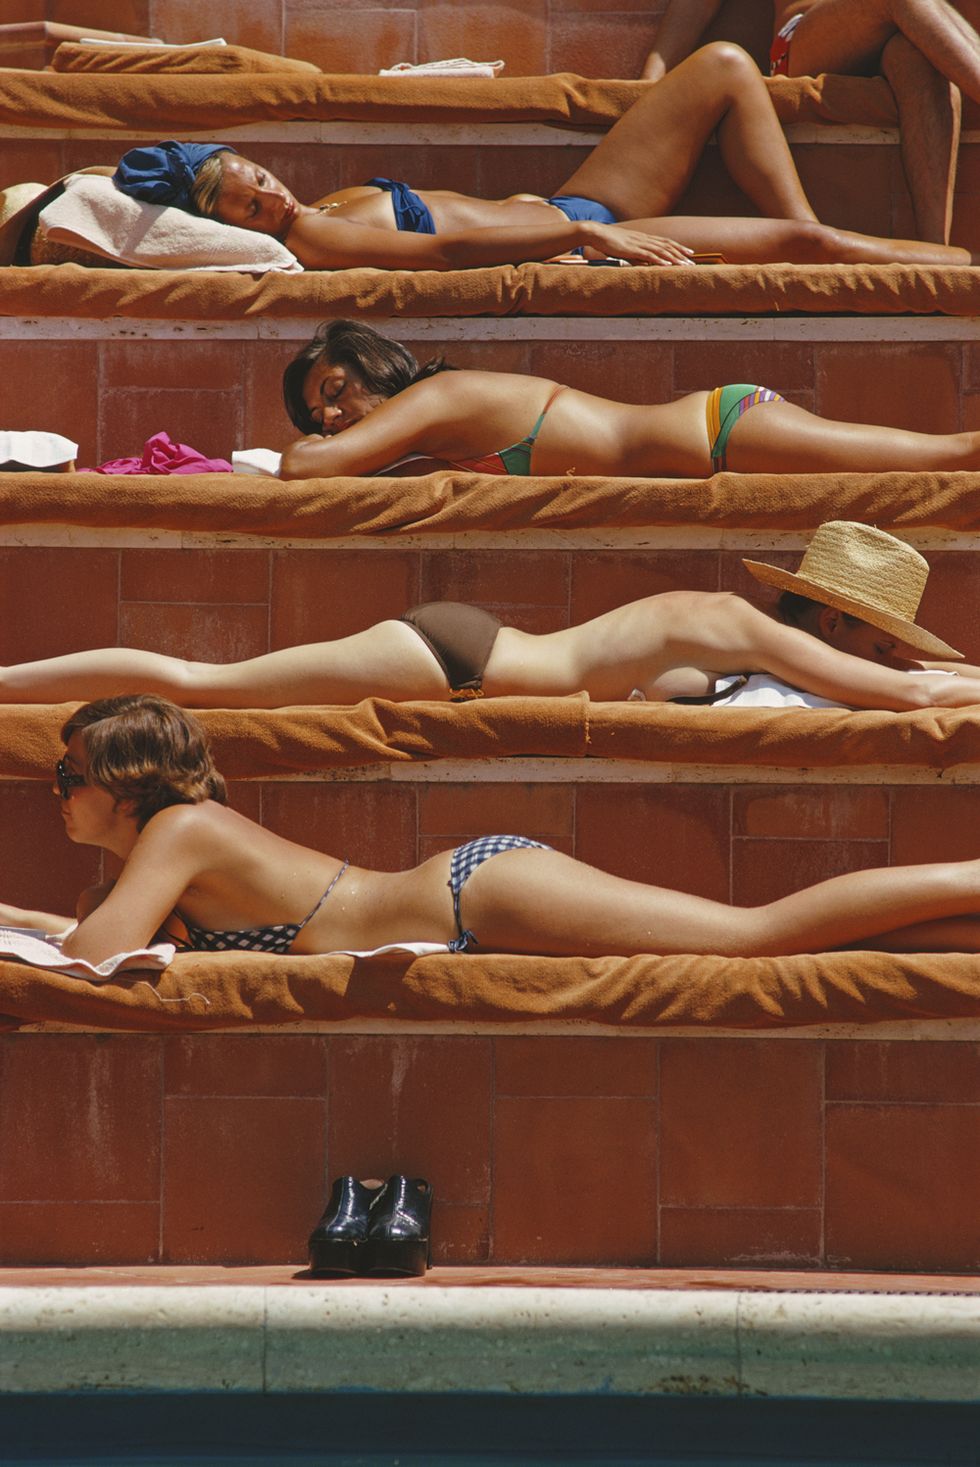 sunbathers by a swimming pool at the hotel punta tragara on the island of capri, italy, august 1974 photo by slim aaronsgetty images